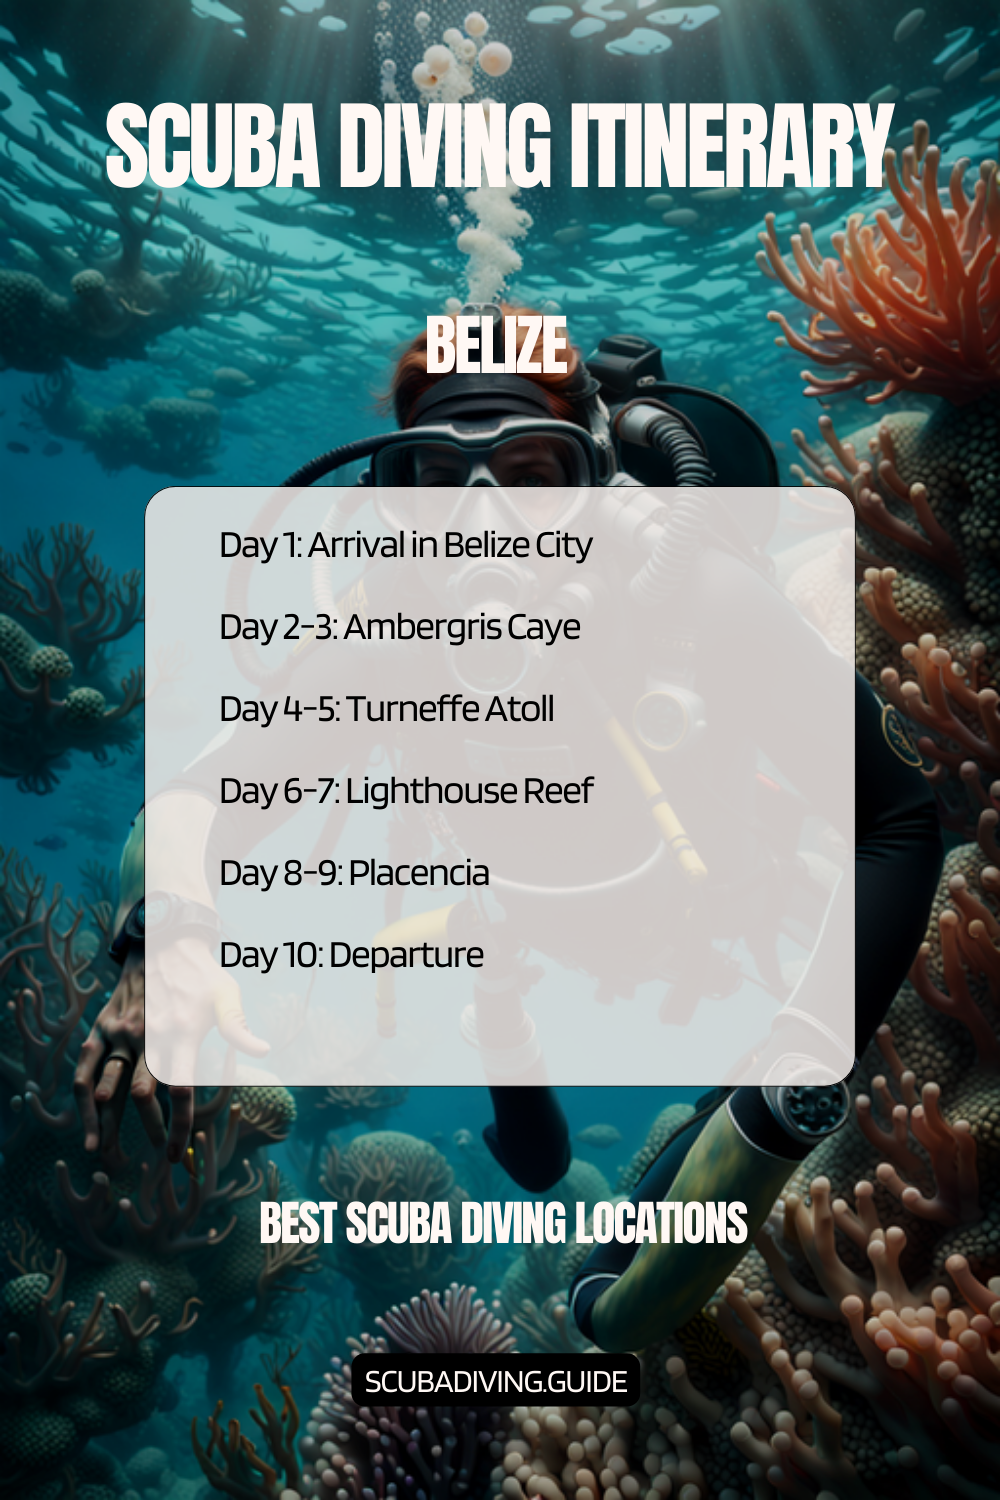 Belize Recommended Scuba Diving Itinerary